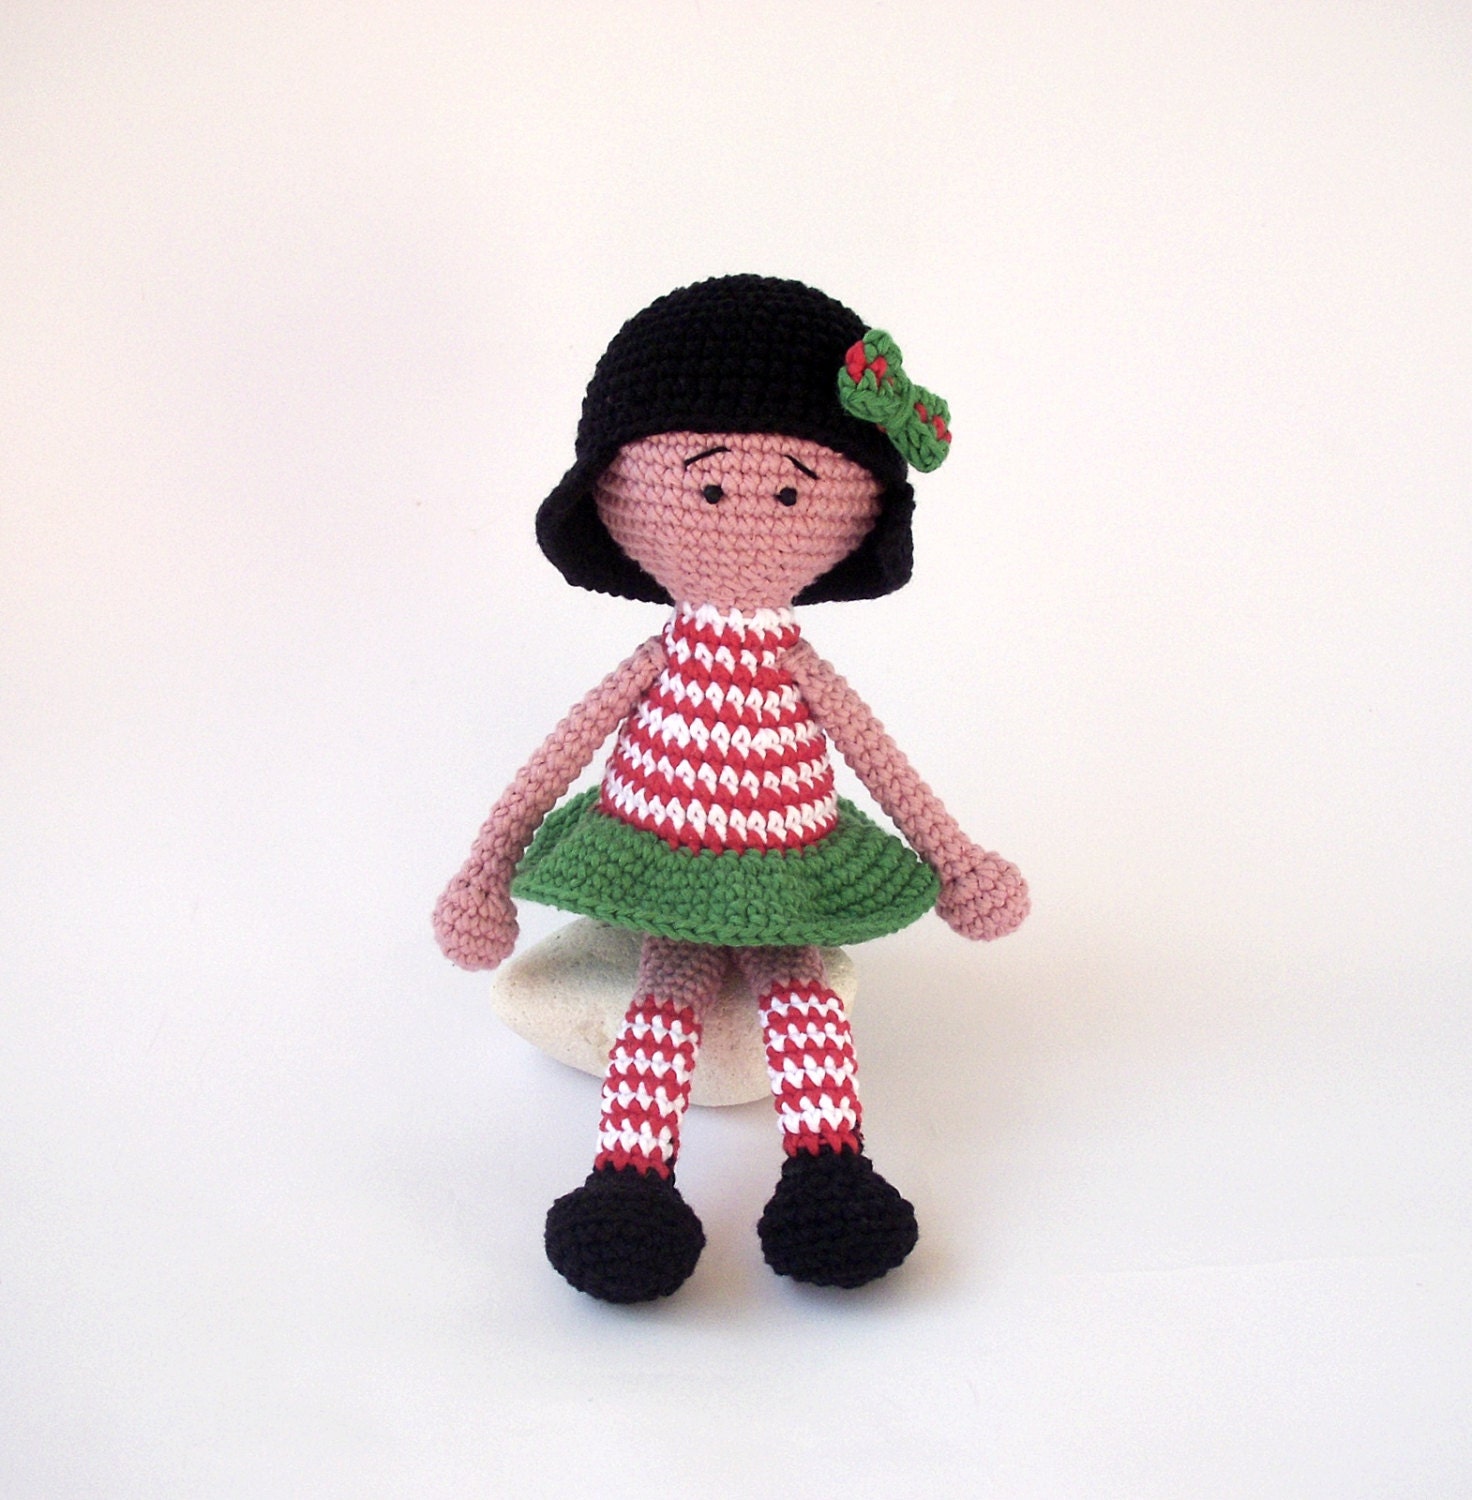 Christmas Primitive Crocheted Doll Crocheted Toy Eco Friendly